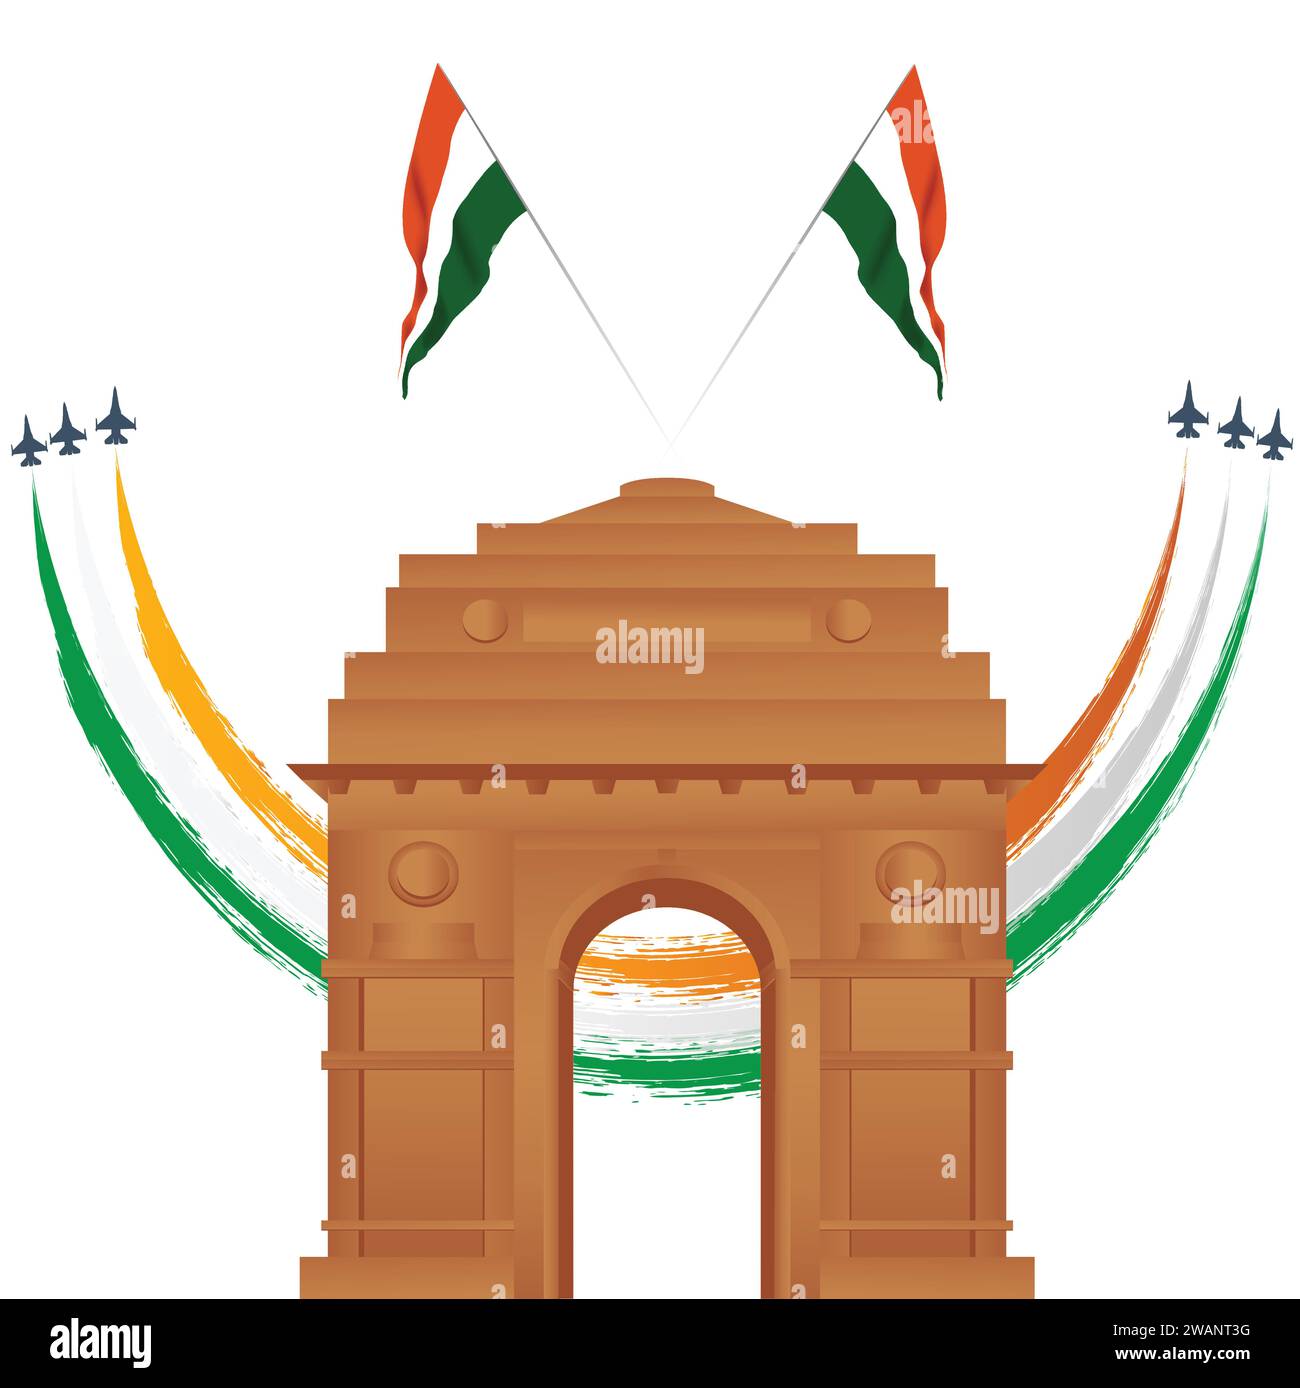 Happy Republic Day india Template | PosterMyWall